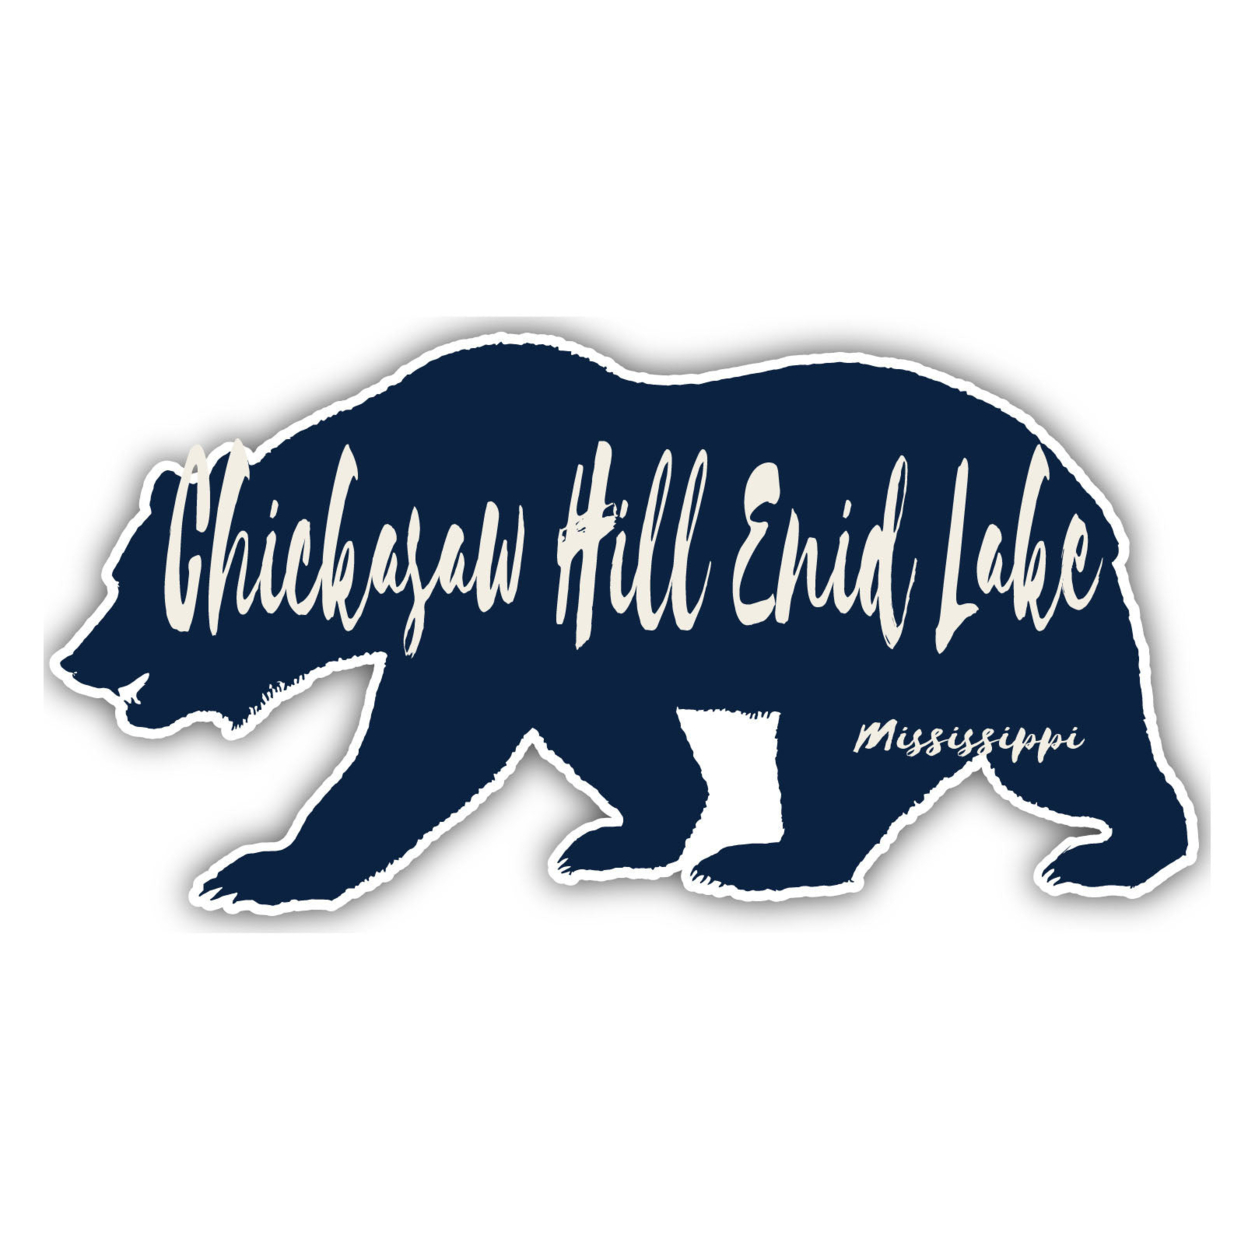 Chickasaw Hill Enid Lake Mississippi Souvenir Decorative Stickers (Choose Theme And Size) - Single Unit, 8-Inch, Bear